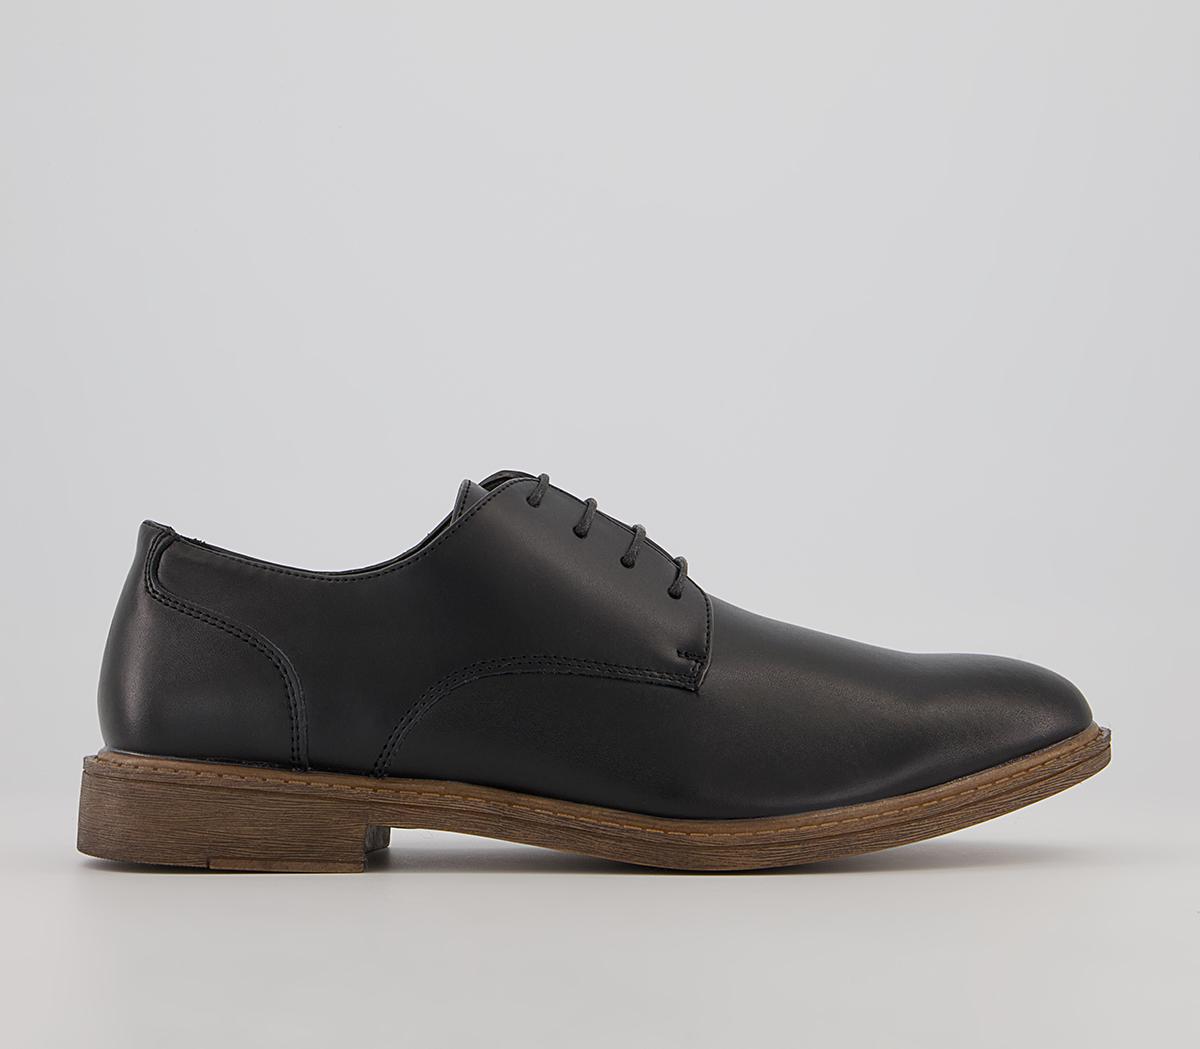 Curton Smart Casual Derby Shoes Black Leather